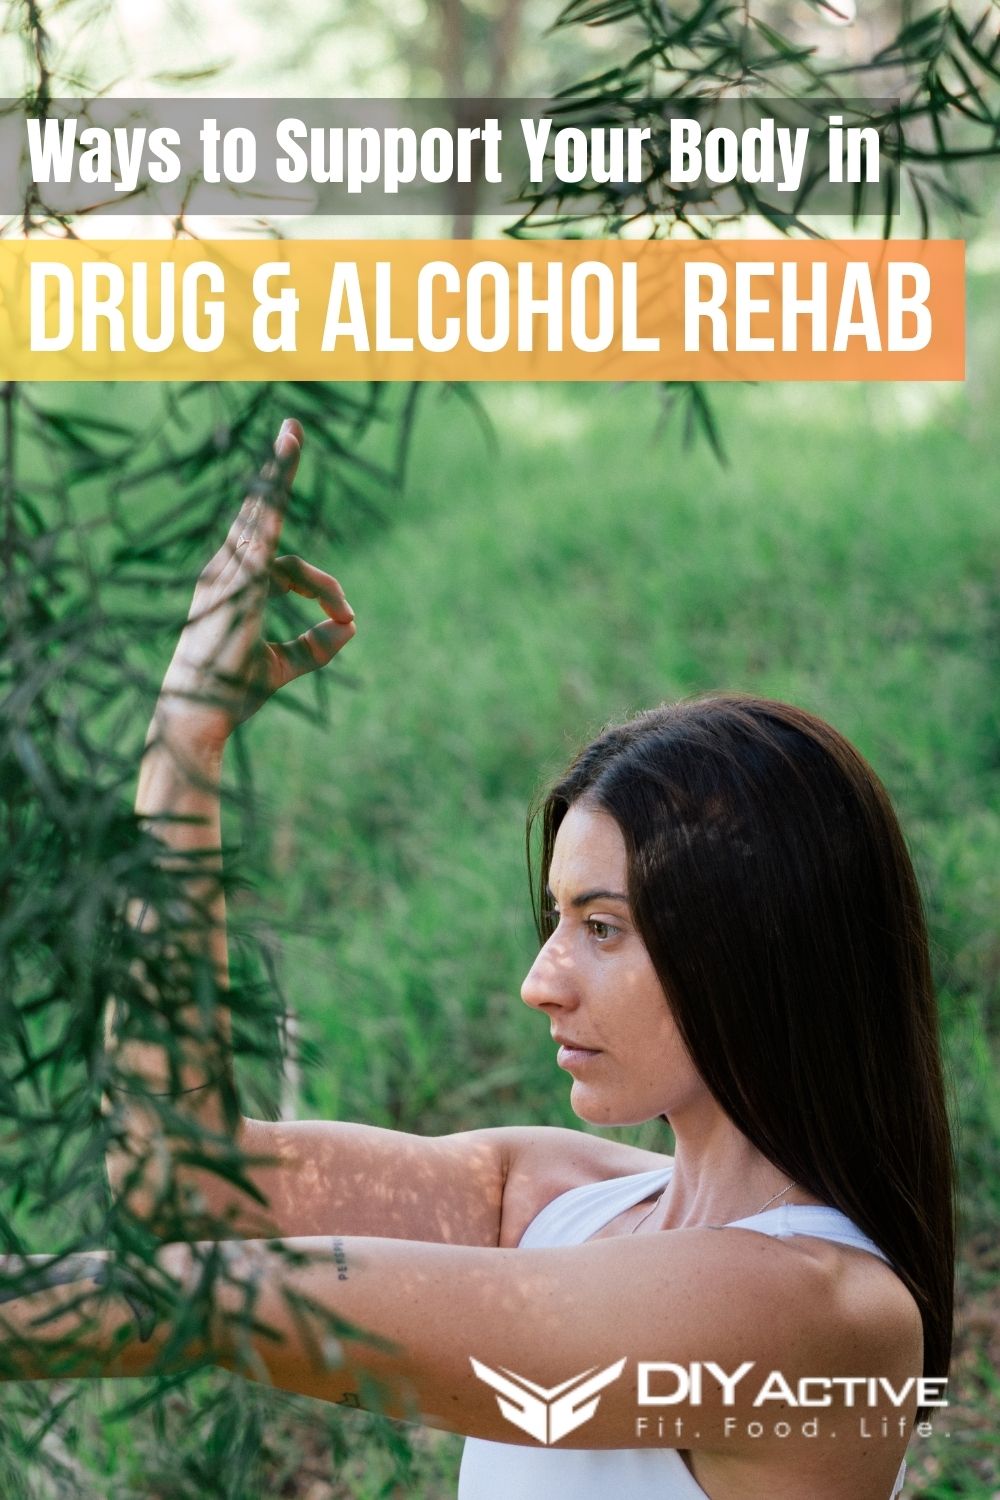 Top 3 Ways to Support Your Body in Drug and Alcohol Rehab2